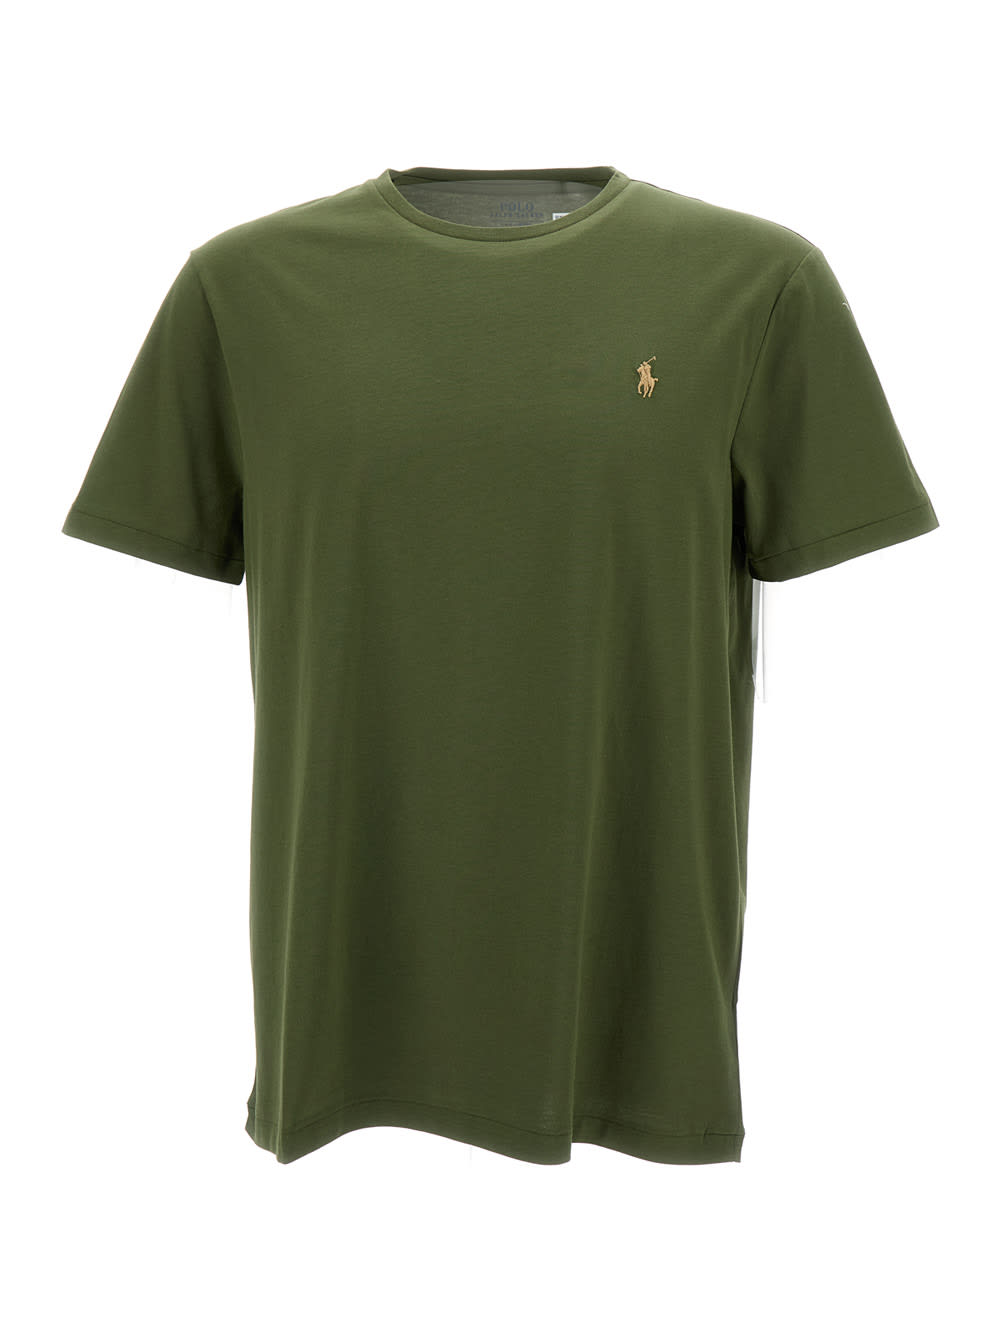 POLO RALPH LAUREN DARK GREEN CREWNECK T-SHIRT WITH PONY EMBROIDERY IN COTTON MAN